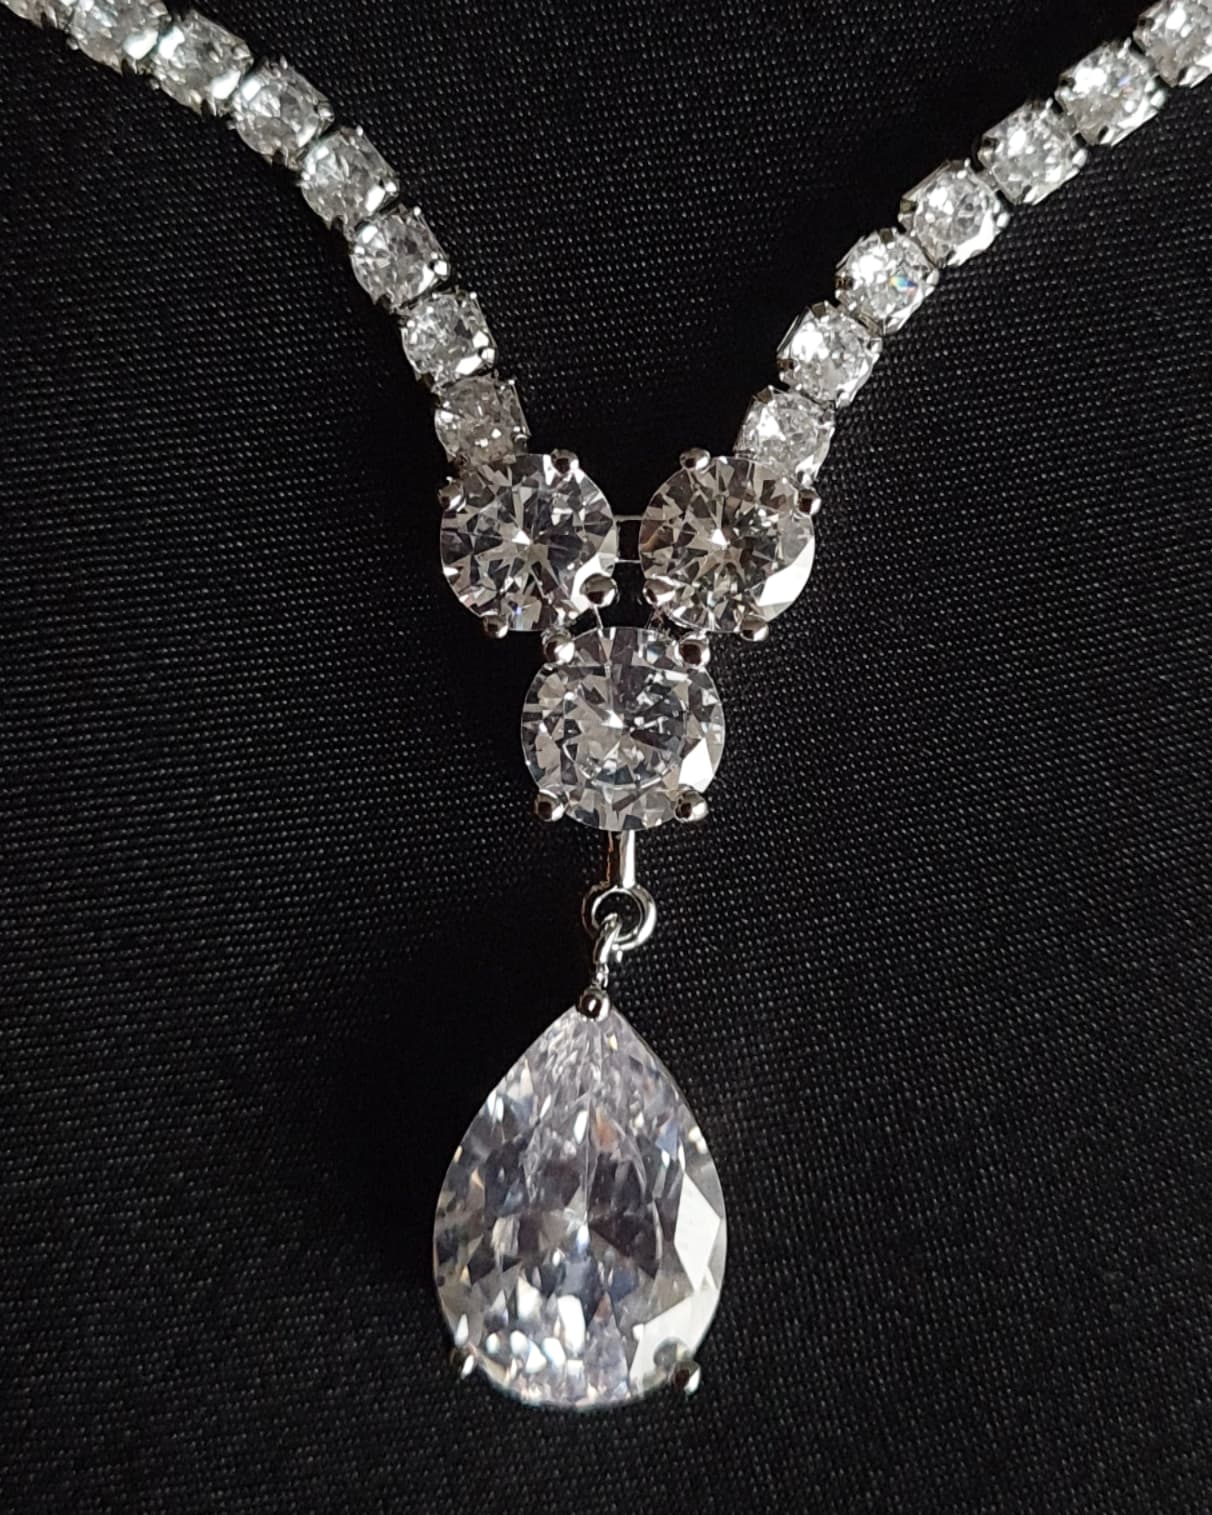 Close-up view of a diamond necklace sparkling with zirconia Diamonds displayed on a black table. the center piece is tear drop shape.